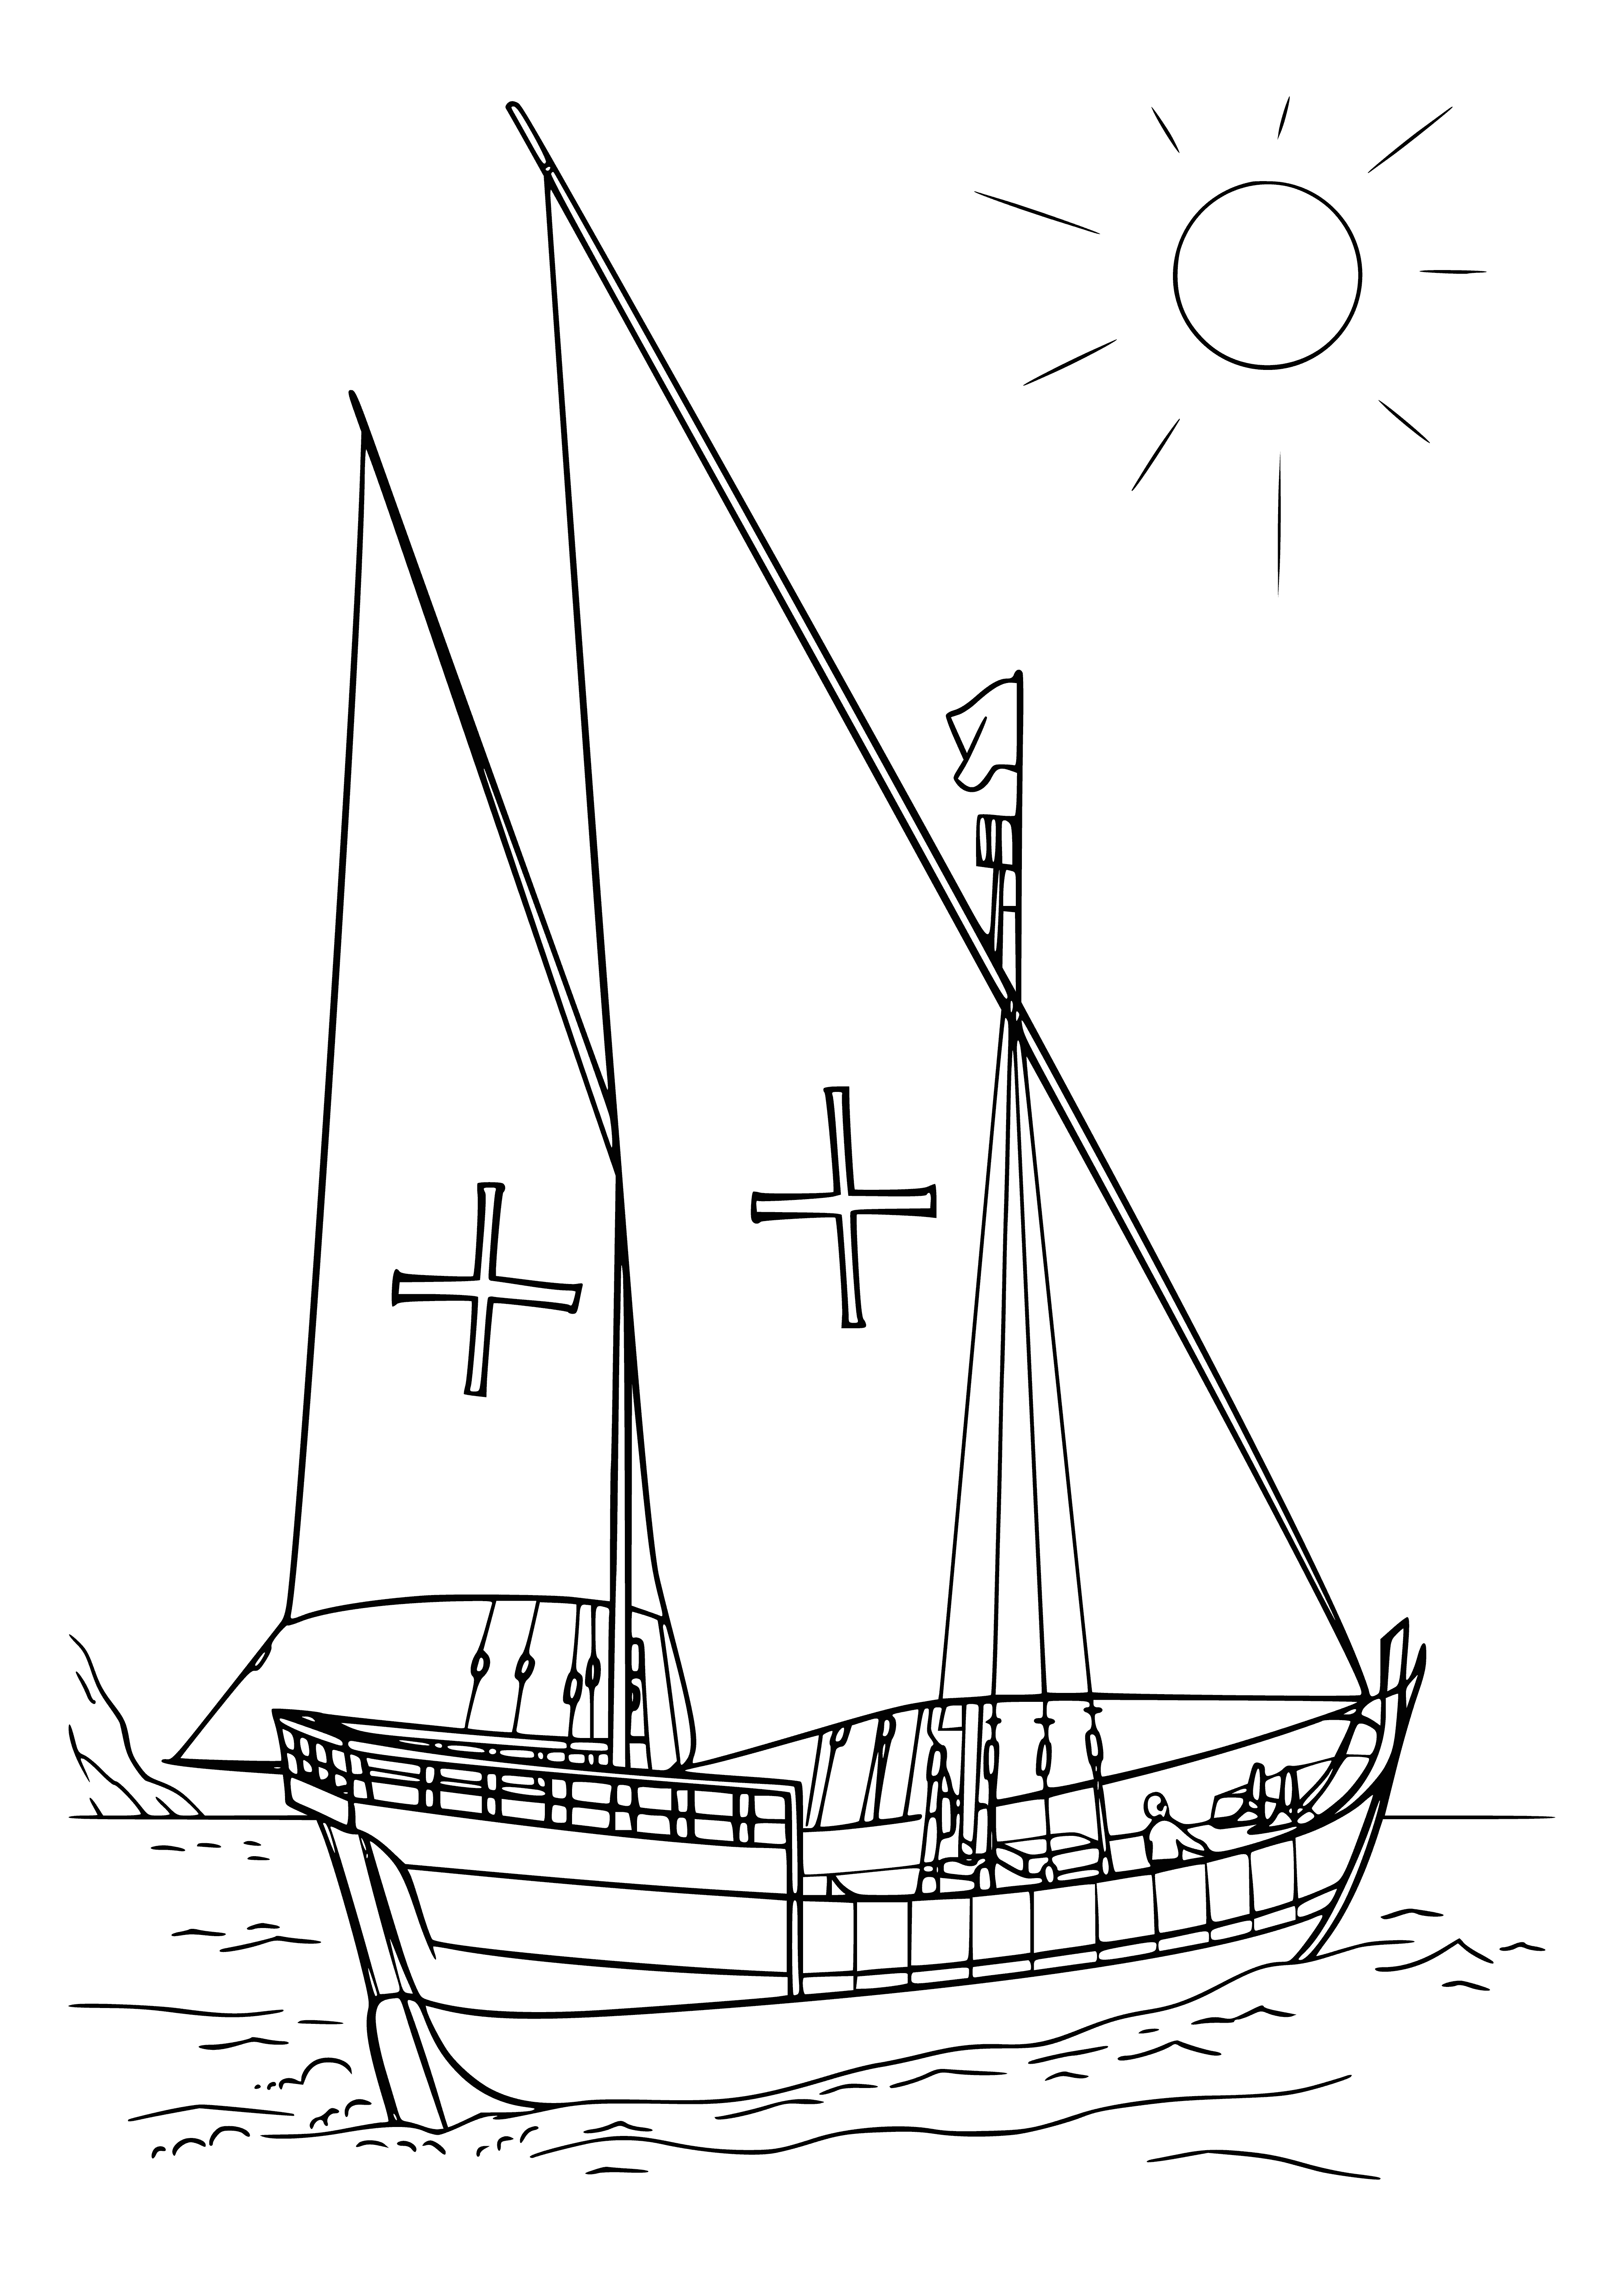 coloring page: Large sailing ship with sails billowing in wind, cruising through calm waters. People on decks & in small boats alongside ship.